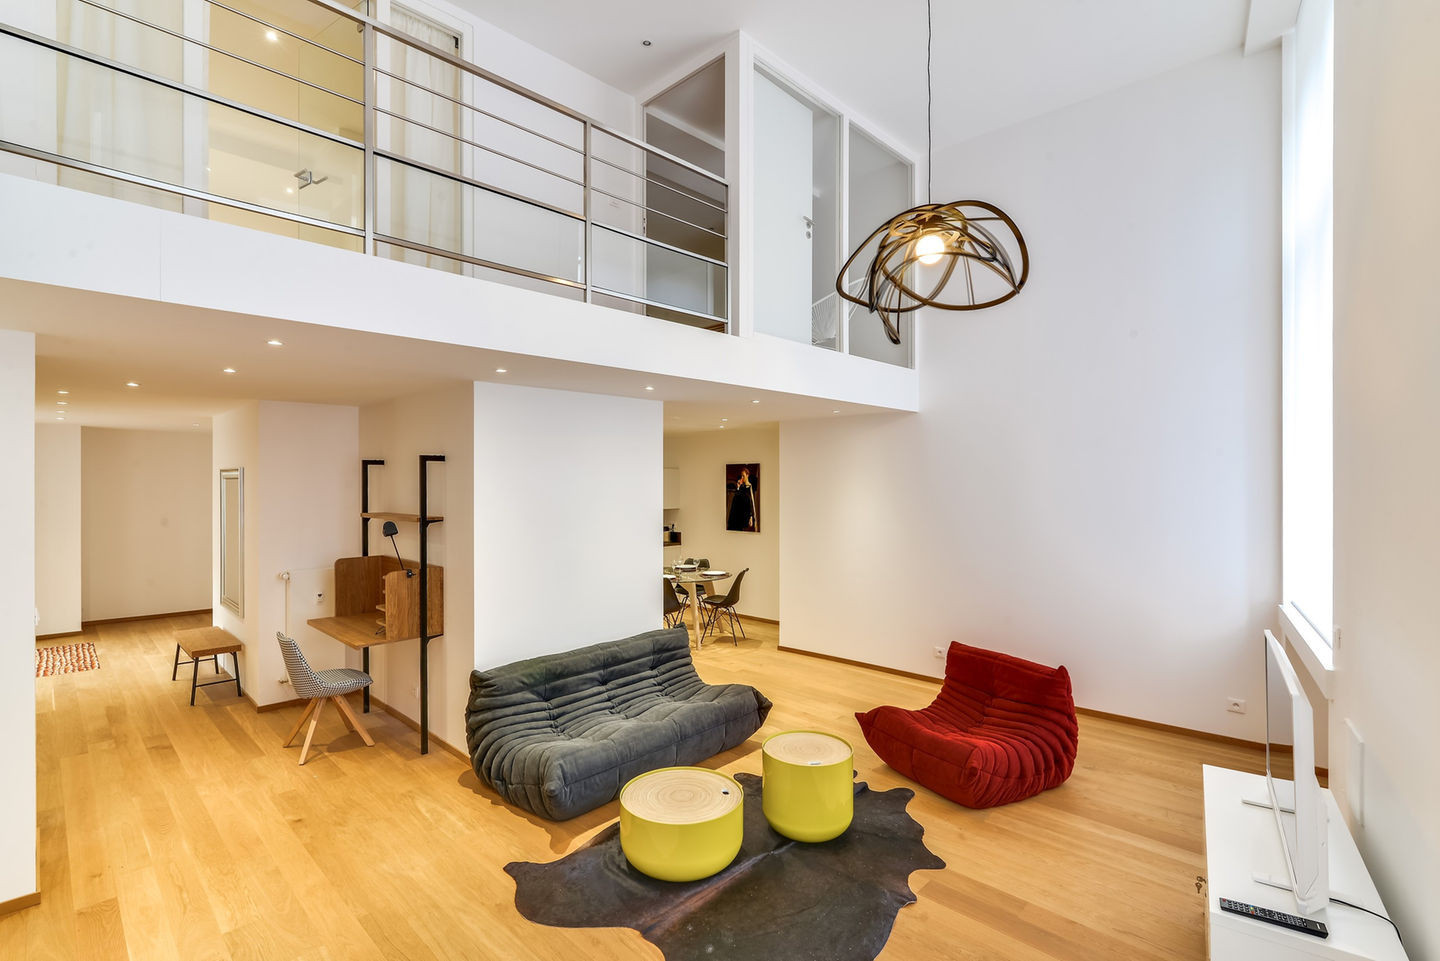  à Strasbourg - loft luxe 127m2 a  500m cathedral    2br 2bth